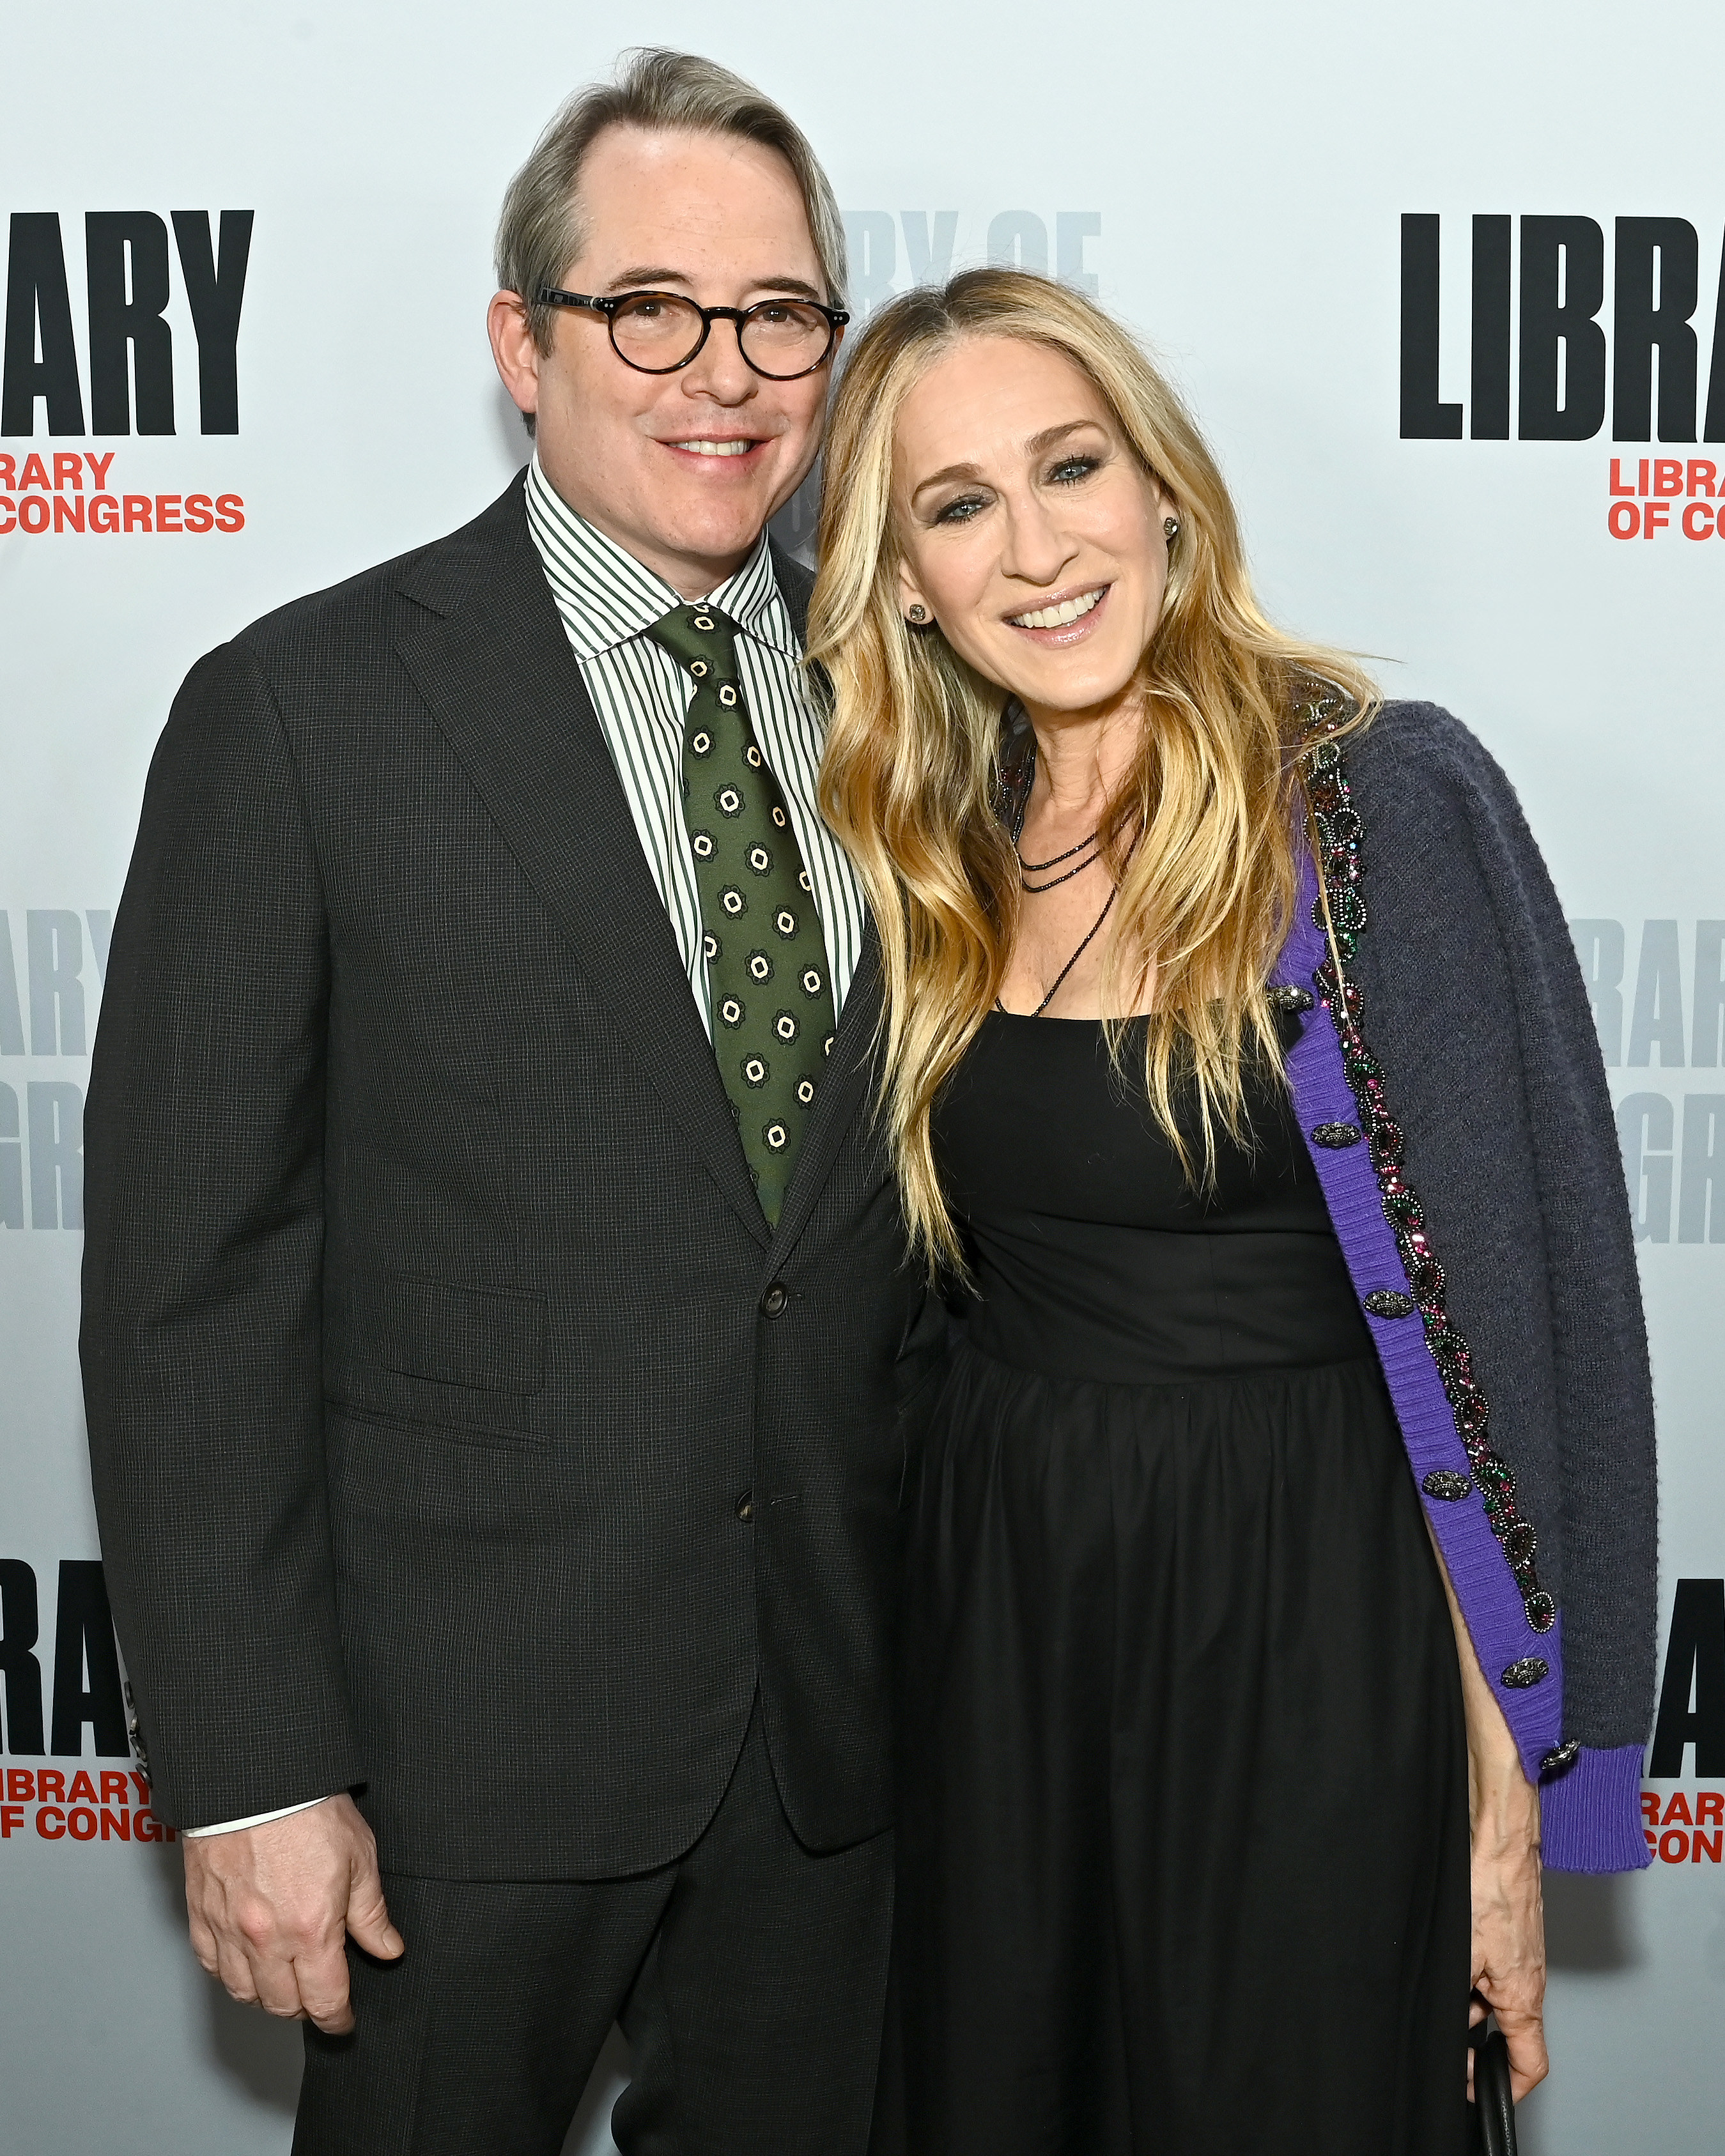 Sarah Jessica Parker and Matthew Broderick on the red carpet